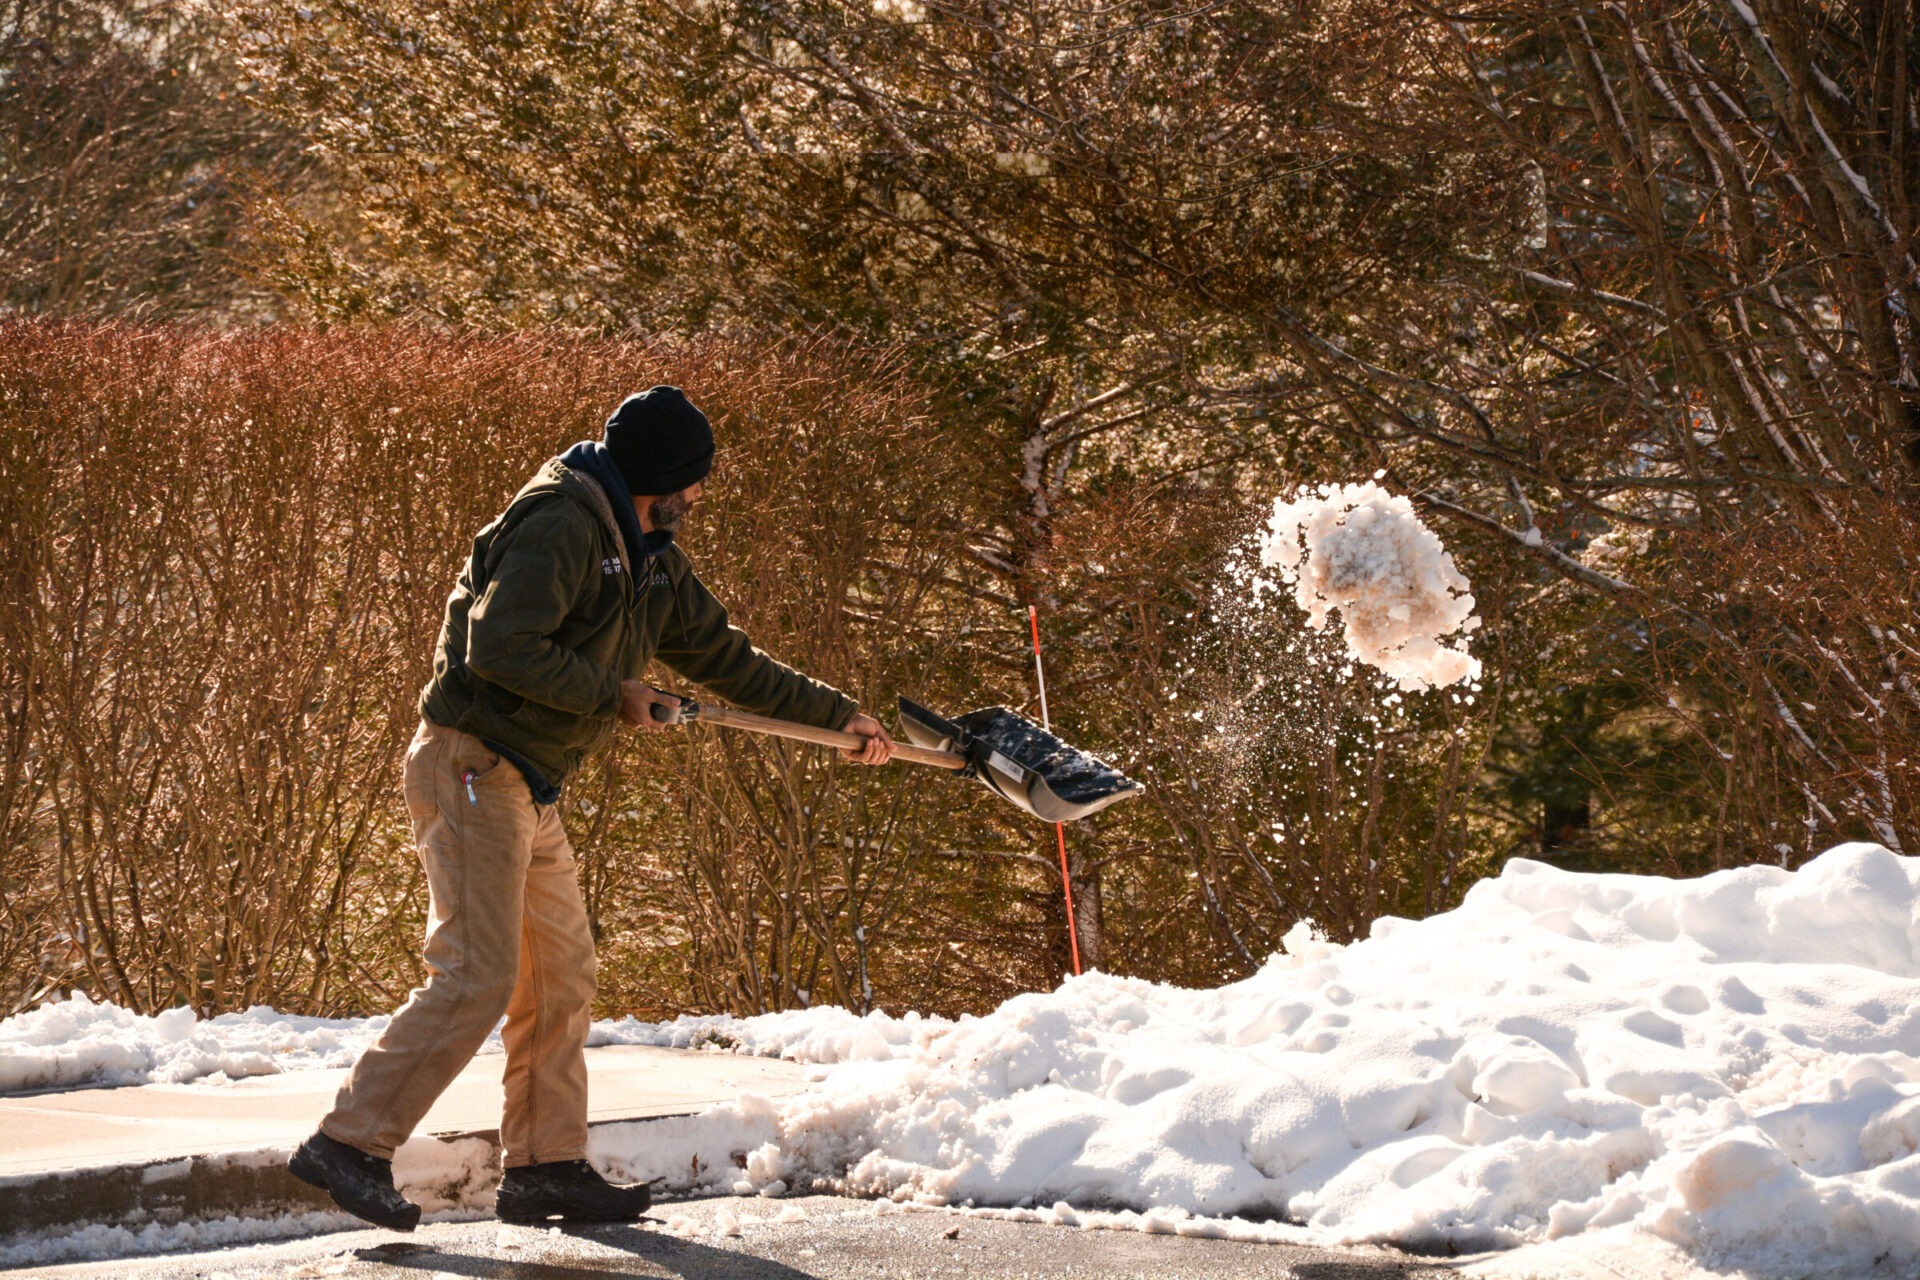 A person is throwing a snowball with a shovel mid-swing, capturing the snow in motion. They are bundled up against a wintry, sunny background.